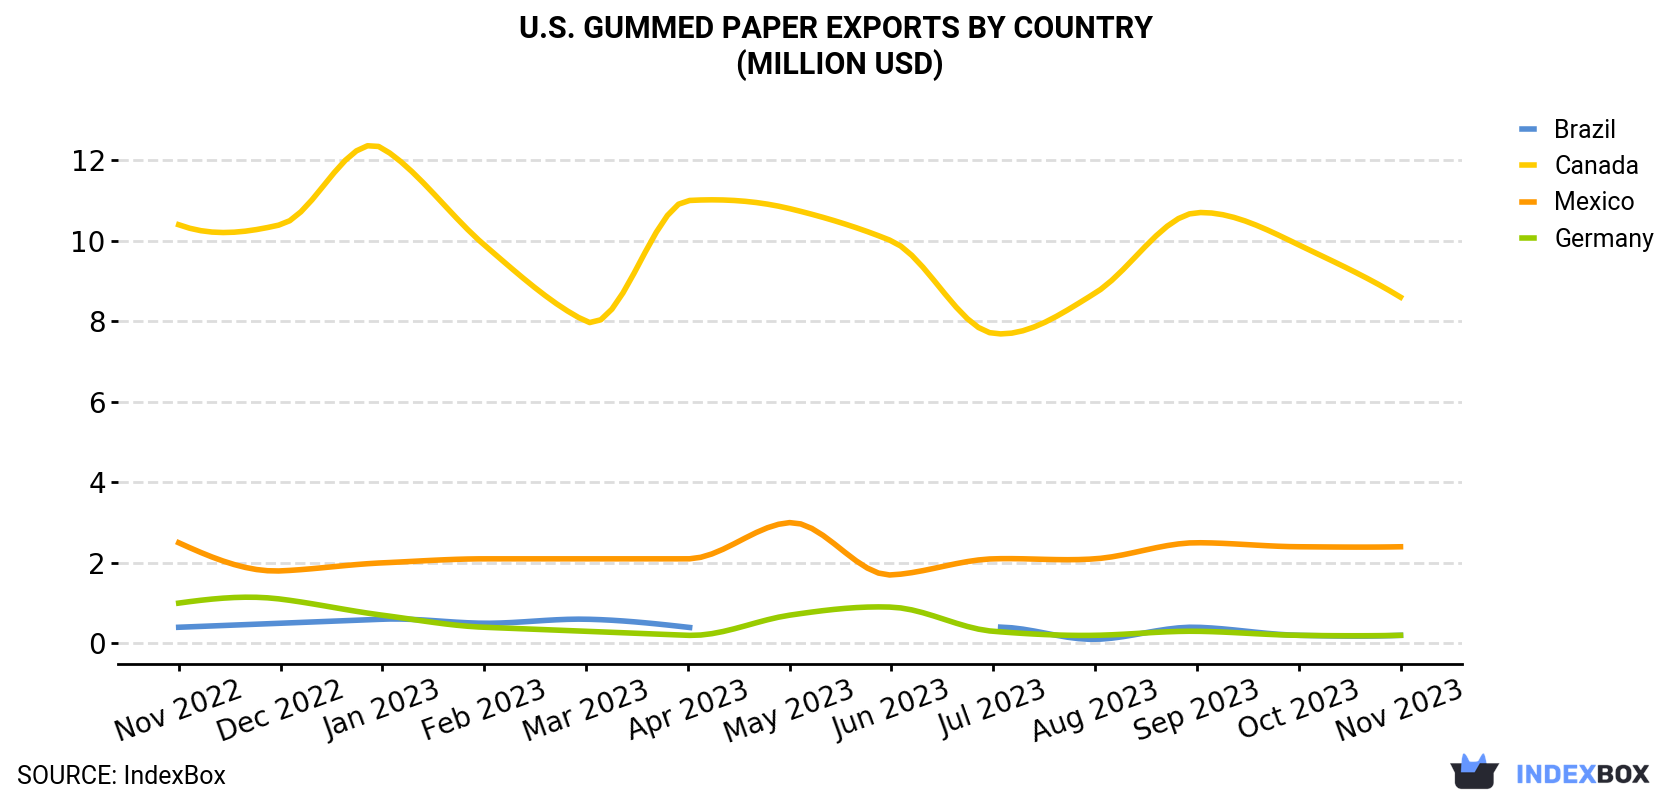 U.S. Gummed Paper Exports By Country (Million USD)